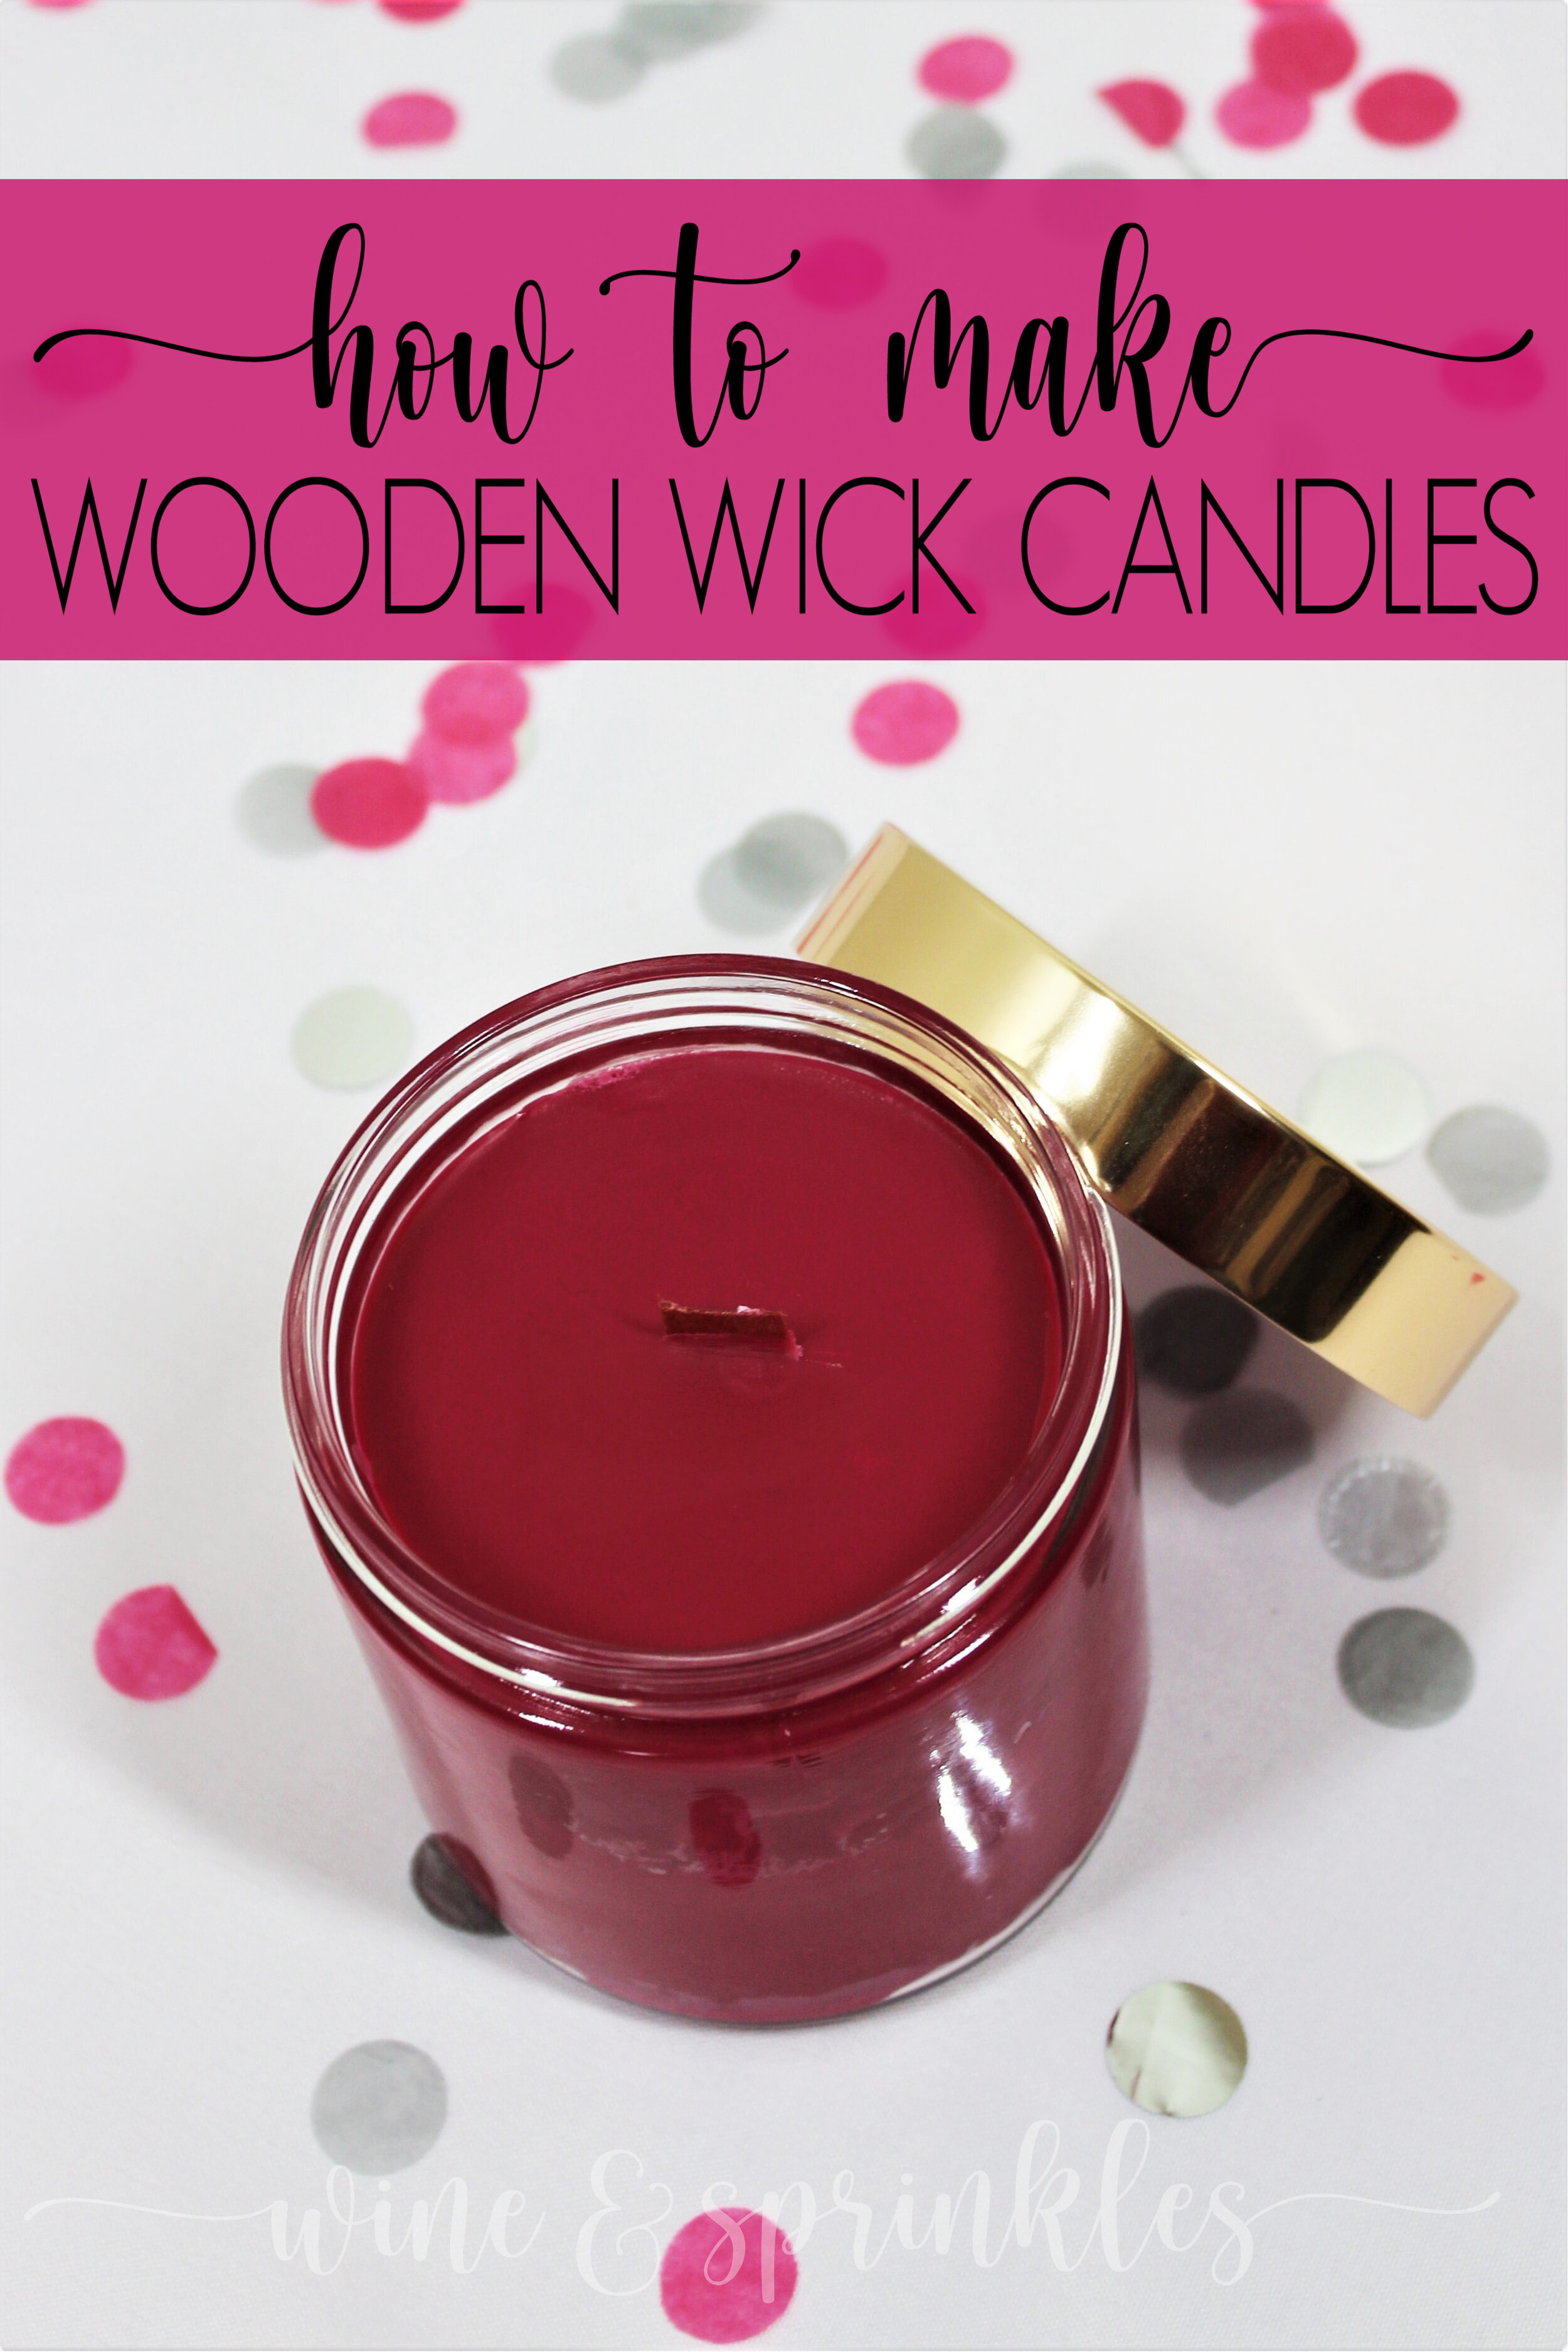 DIY Scented Soy Wax Wooden Wick Candles